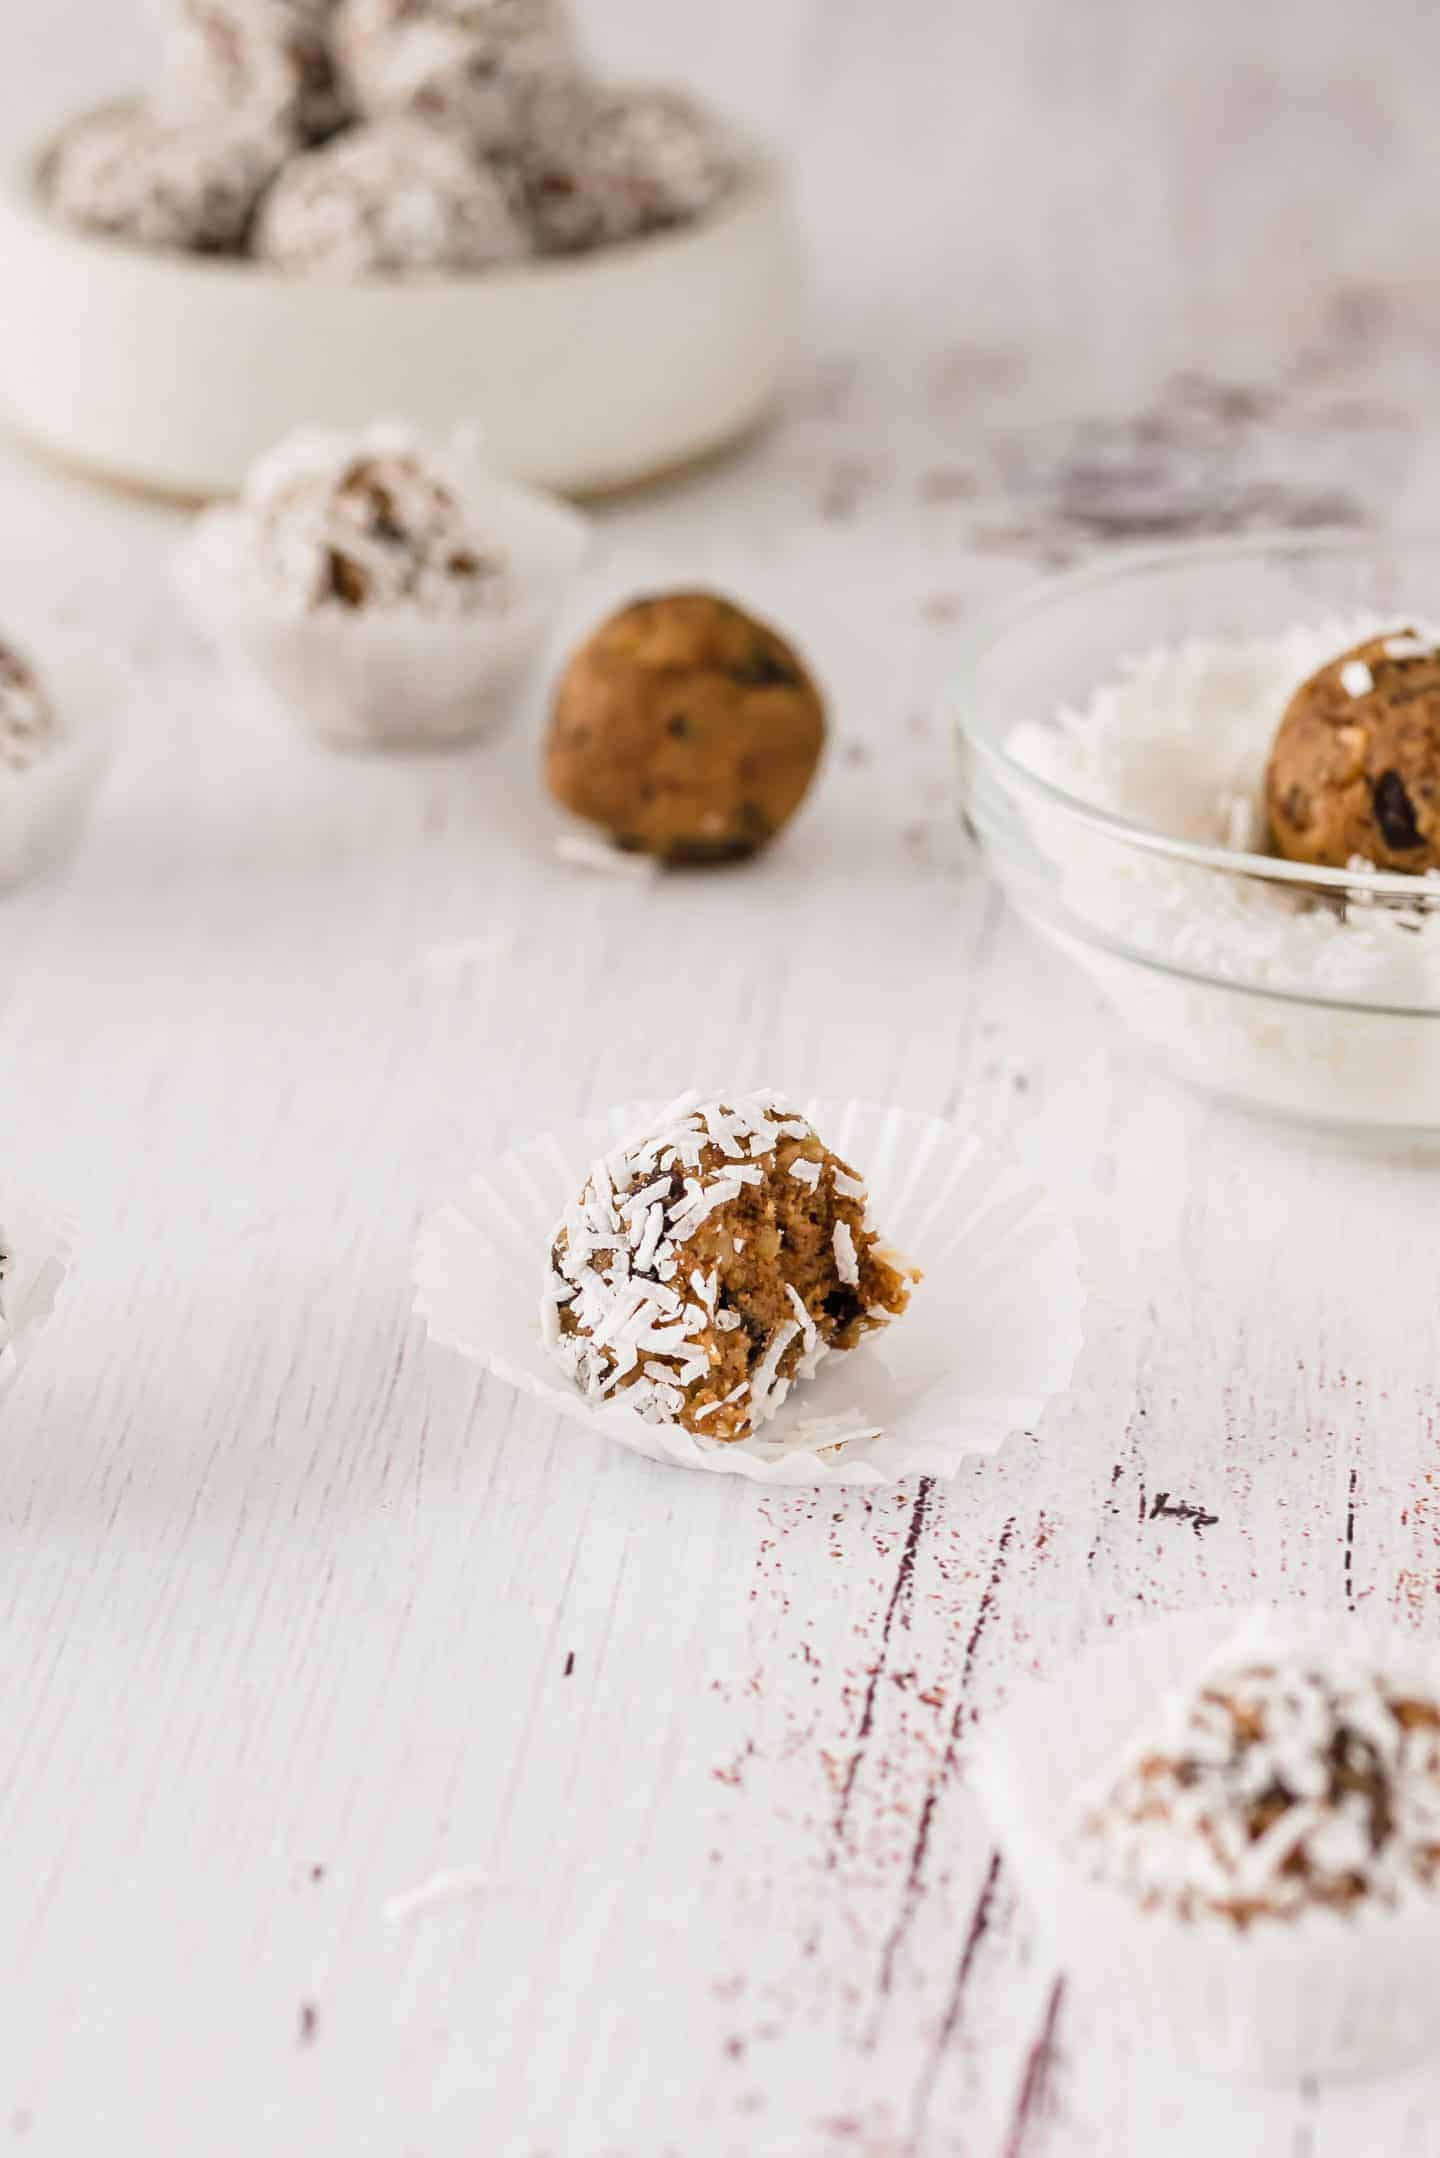 Boozy Truffles with Dulce de Leche, Chocolate, Walnuts, covered in coconut